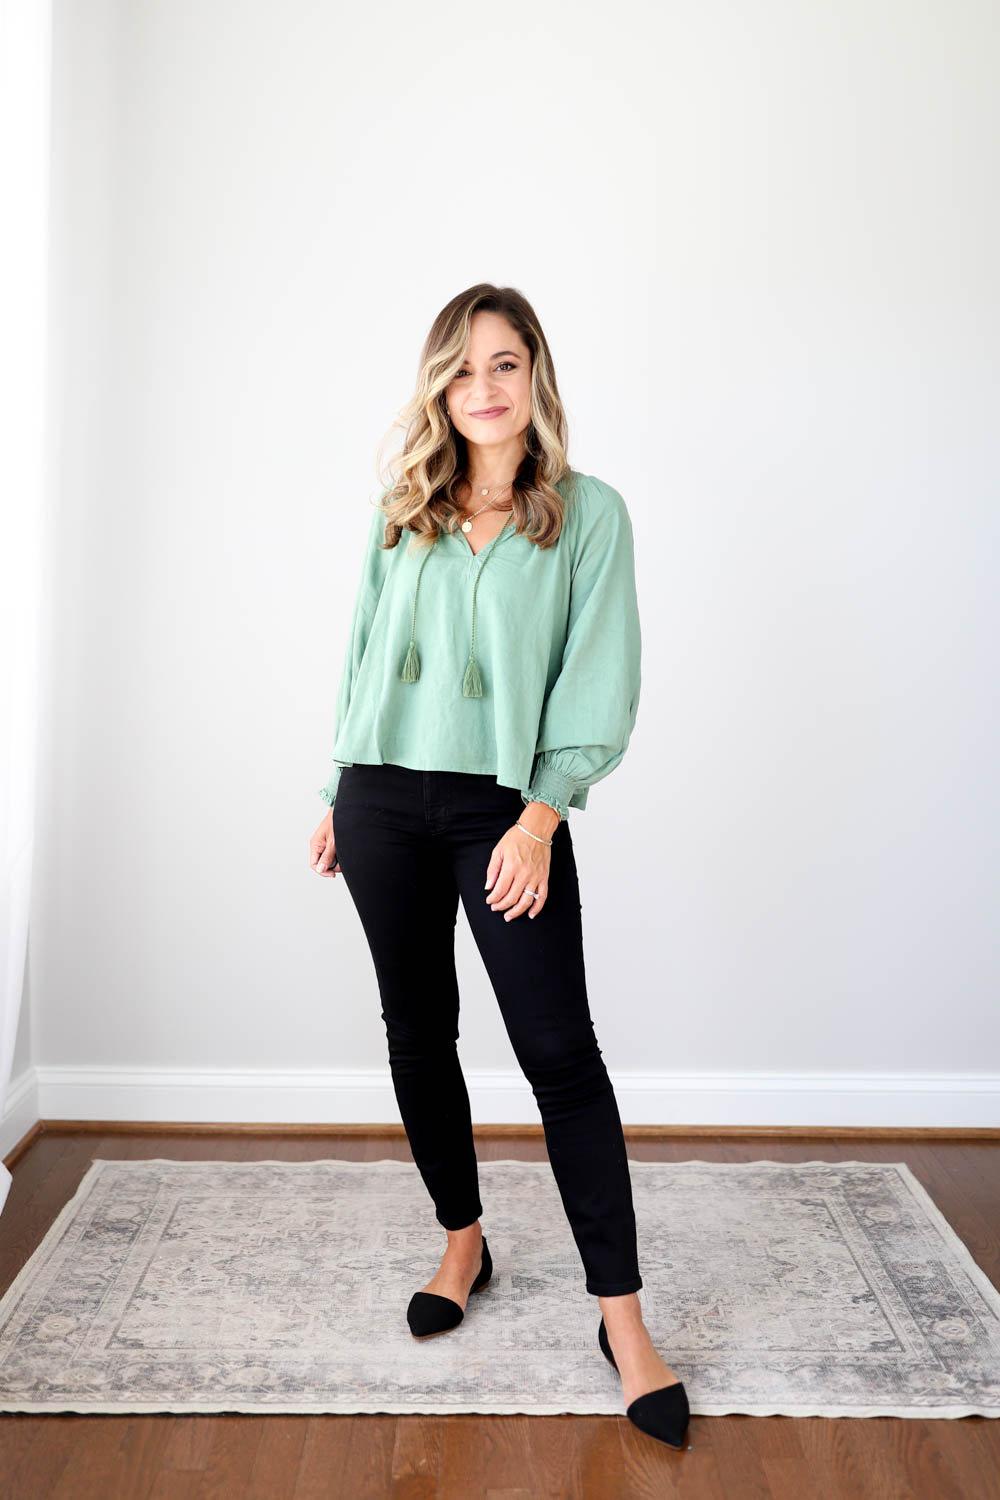 Back-To-School Outfits for Teachers - Pumps & Push Ups